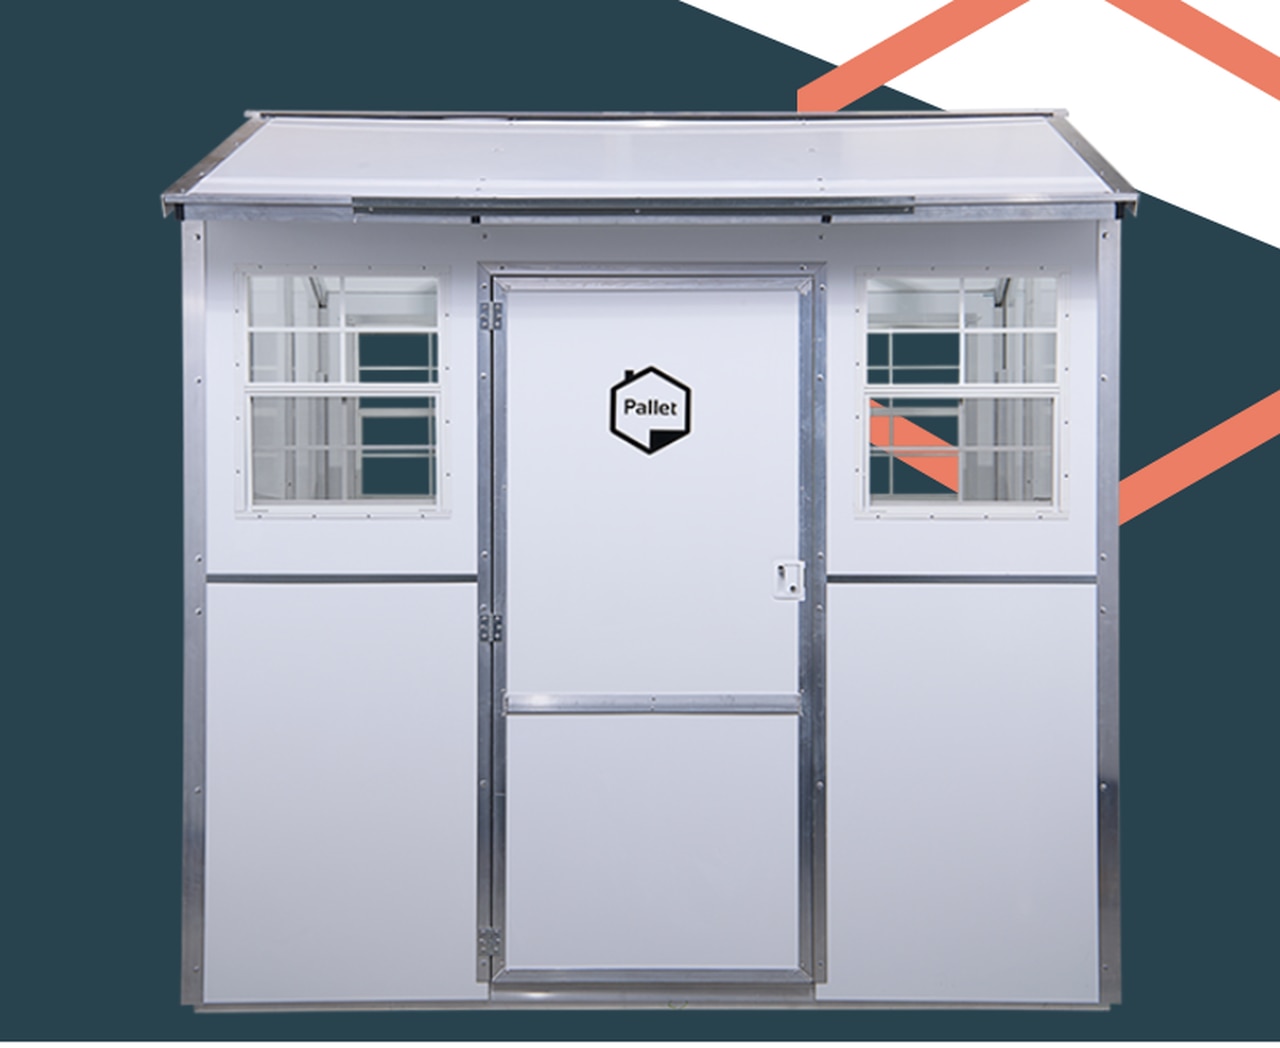 Birmingham proposes tiny house shelters for homeless